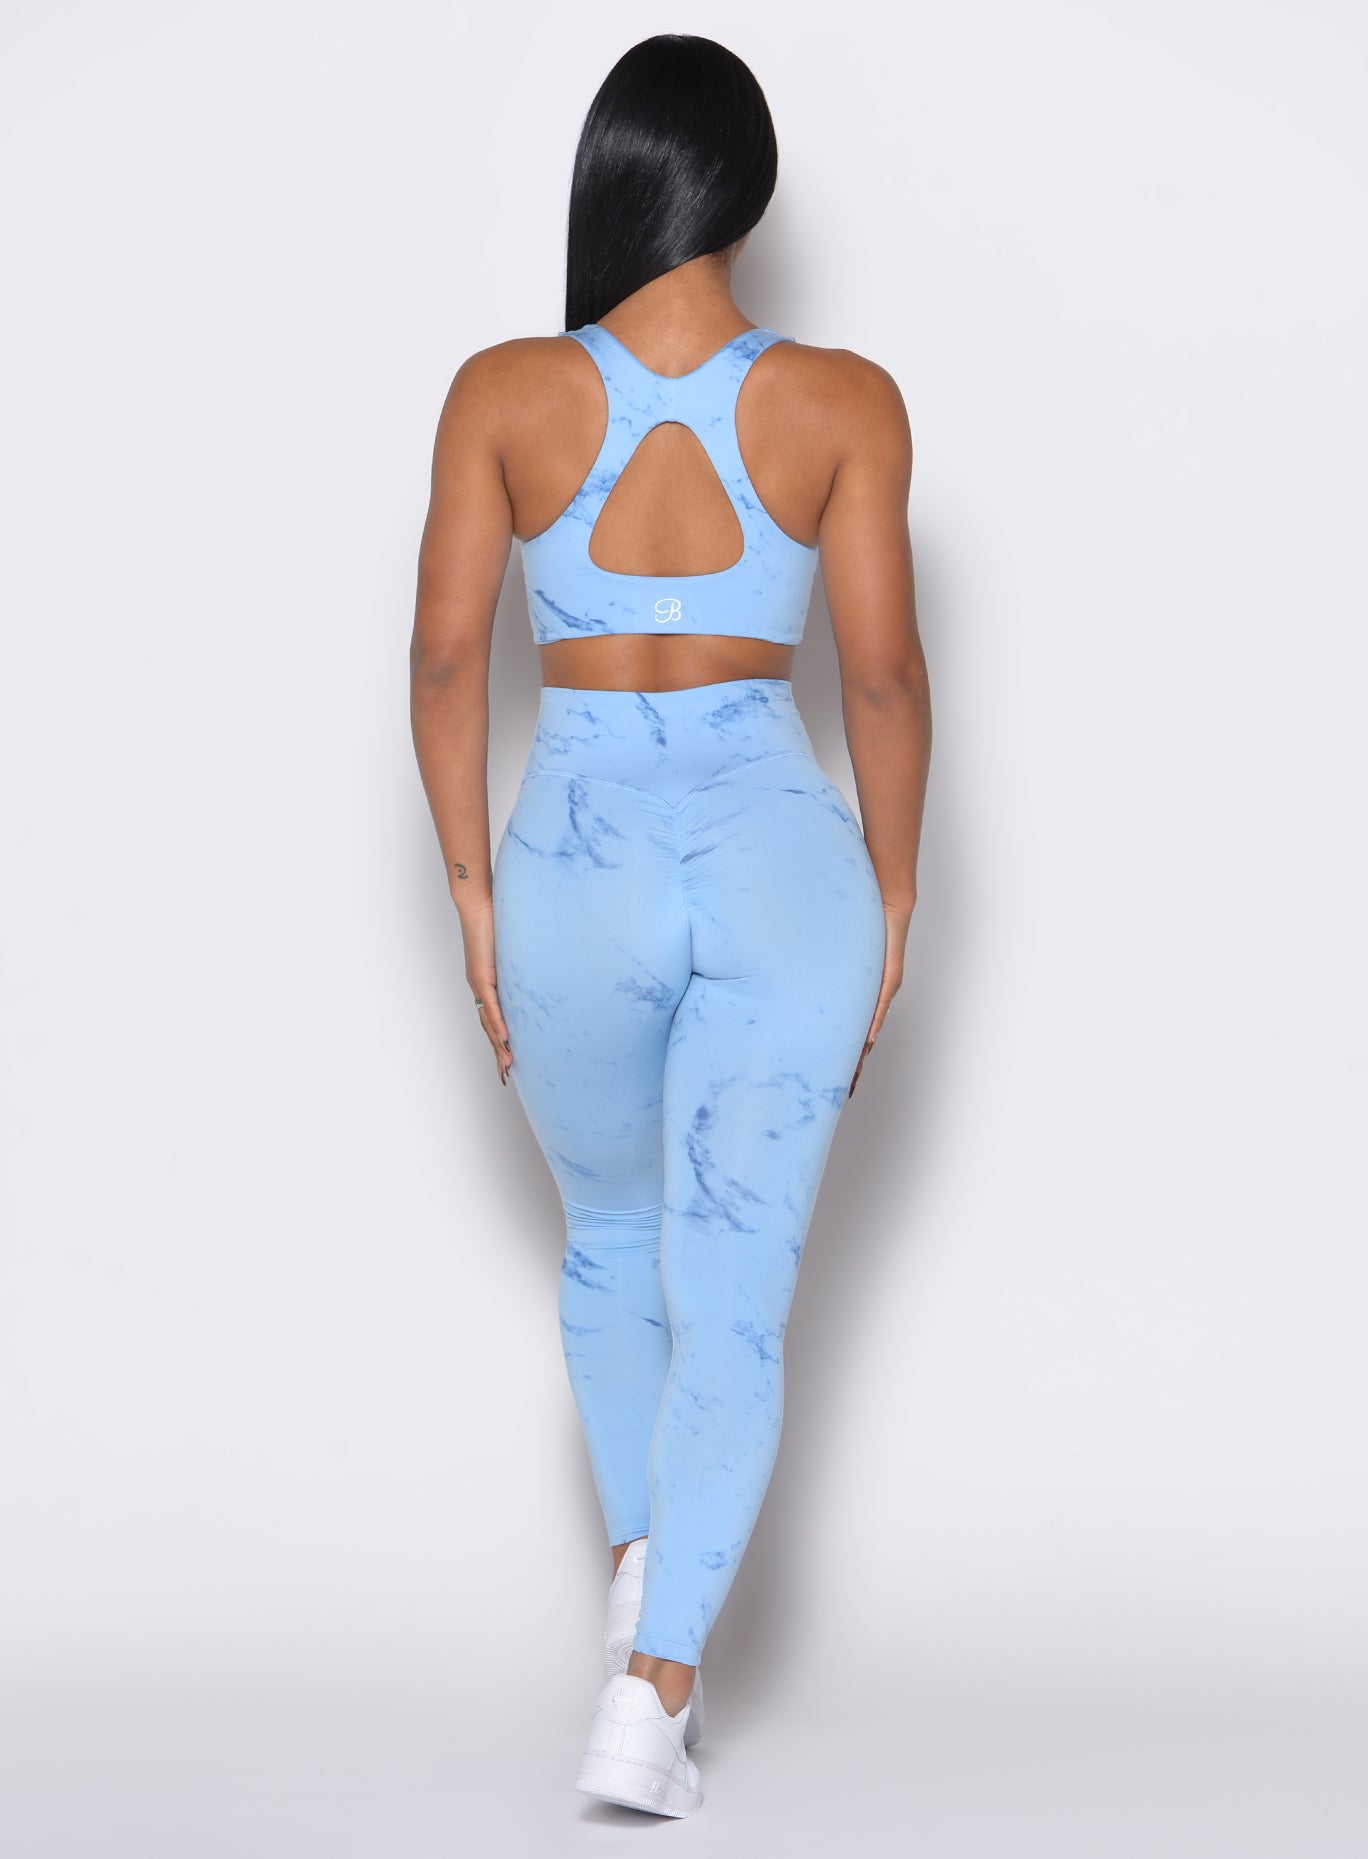 back  profile view of a model wearing our fit marble leggings in Blue Jay color along with a matching bra